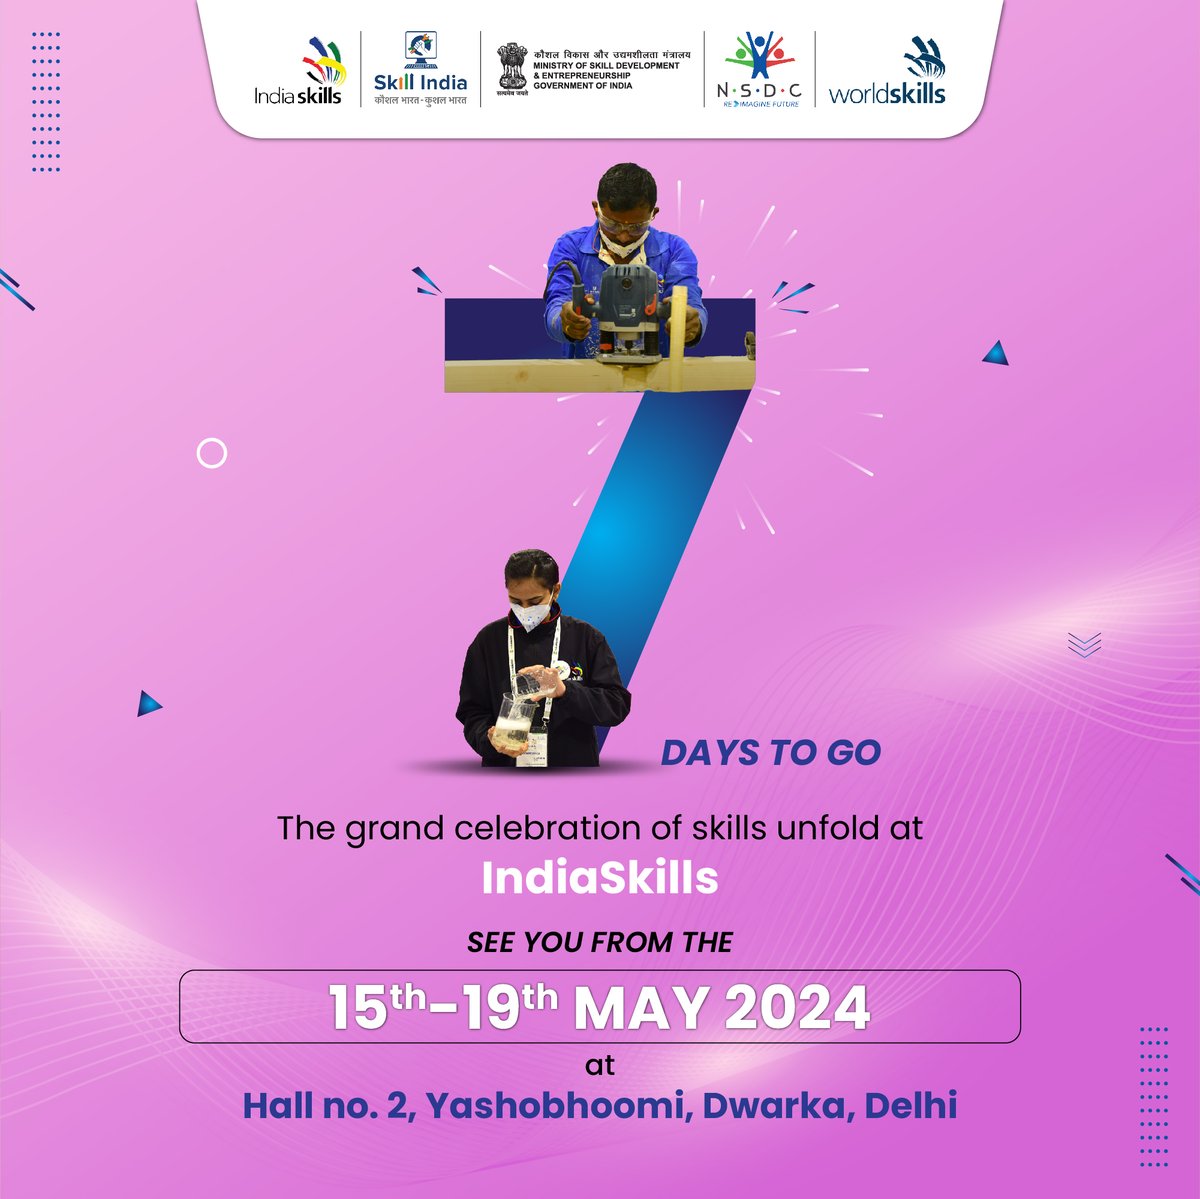 Just 07 days left until Indiaskills 2024 kicks off at Hall No. 2, Yashobhoomi, Dwarka, Delhi, from May 15th to May 19th.
Get ready to witness skilled individuals competing to bring honour to our nation on the global stage. Don't miss out!
#Indiaskills2024 #ProudIndia #SkillIndia